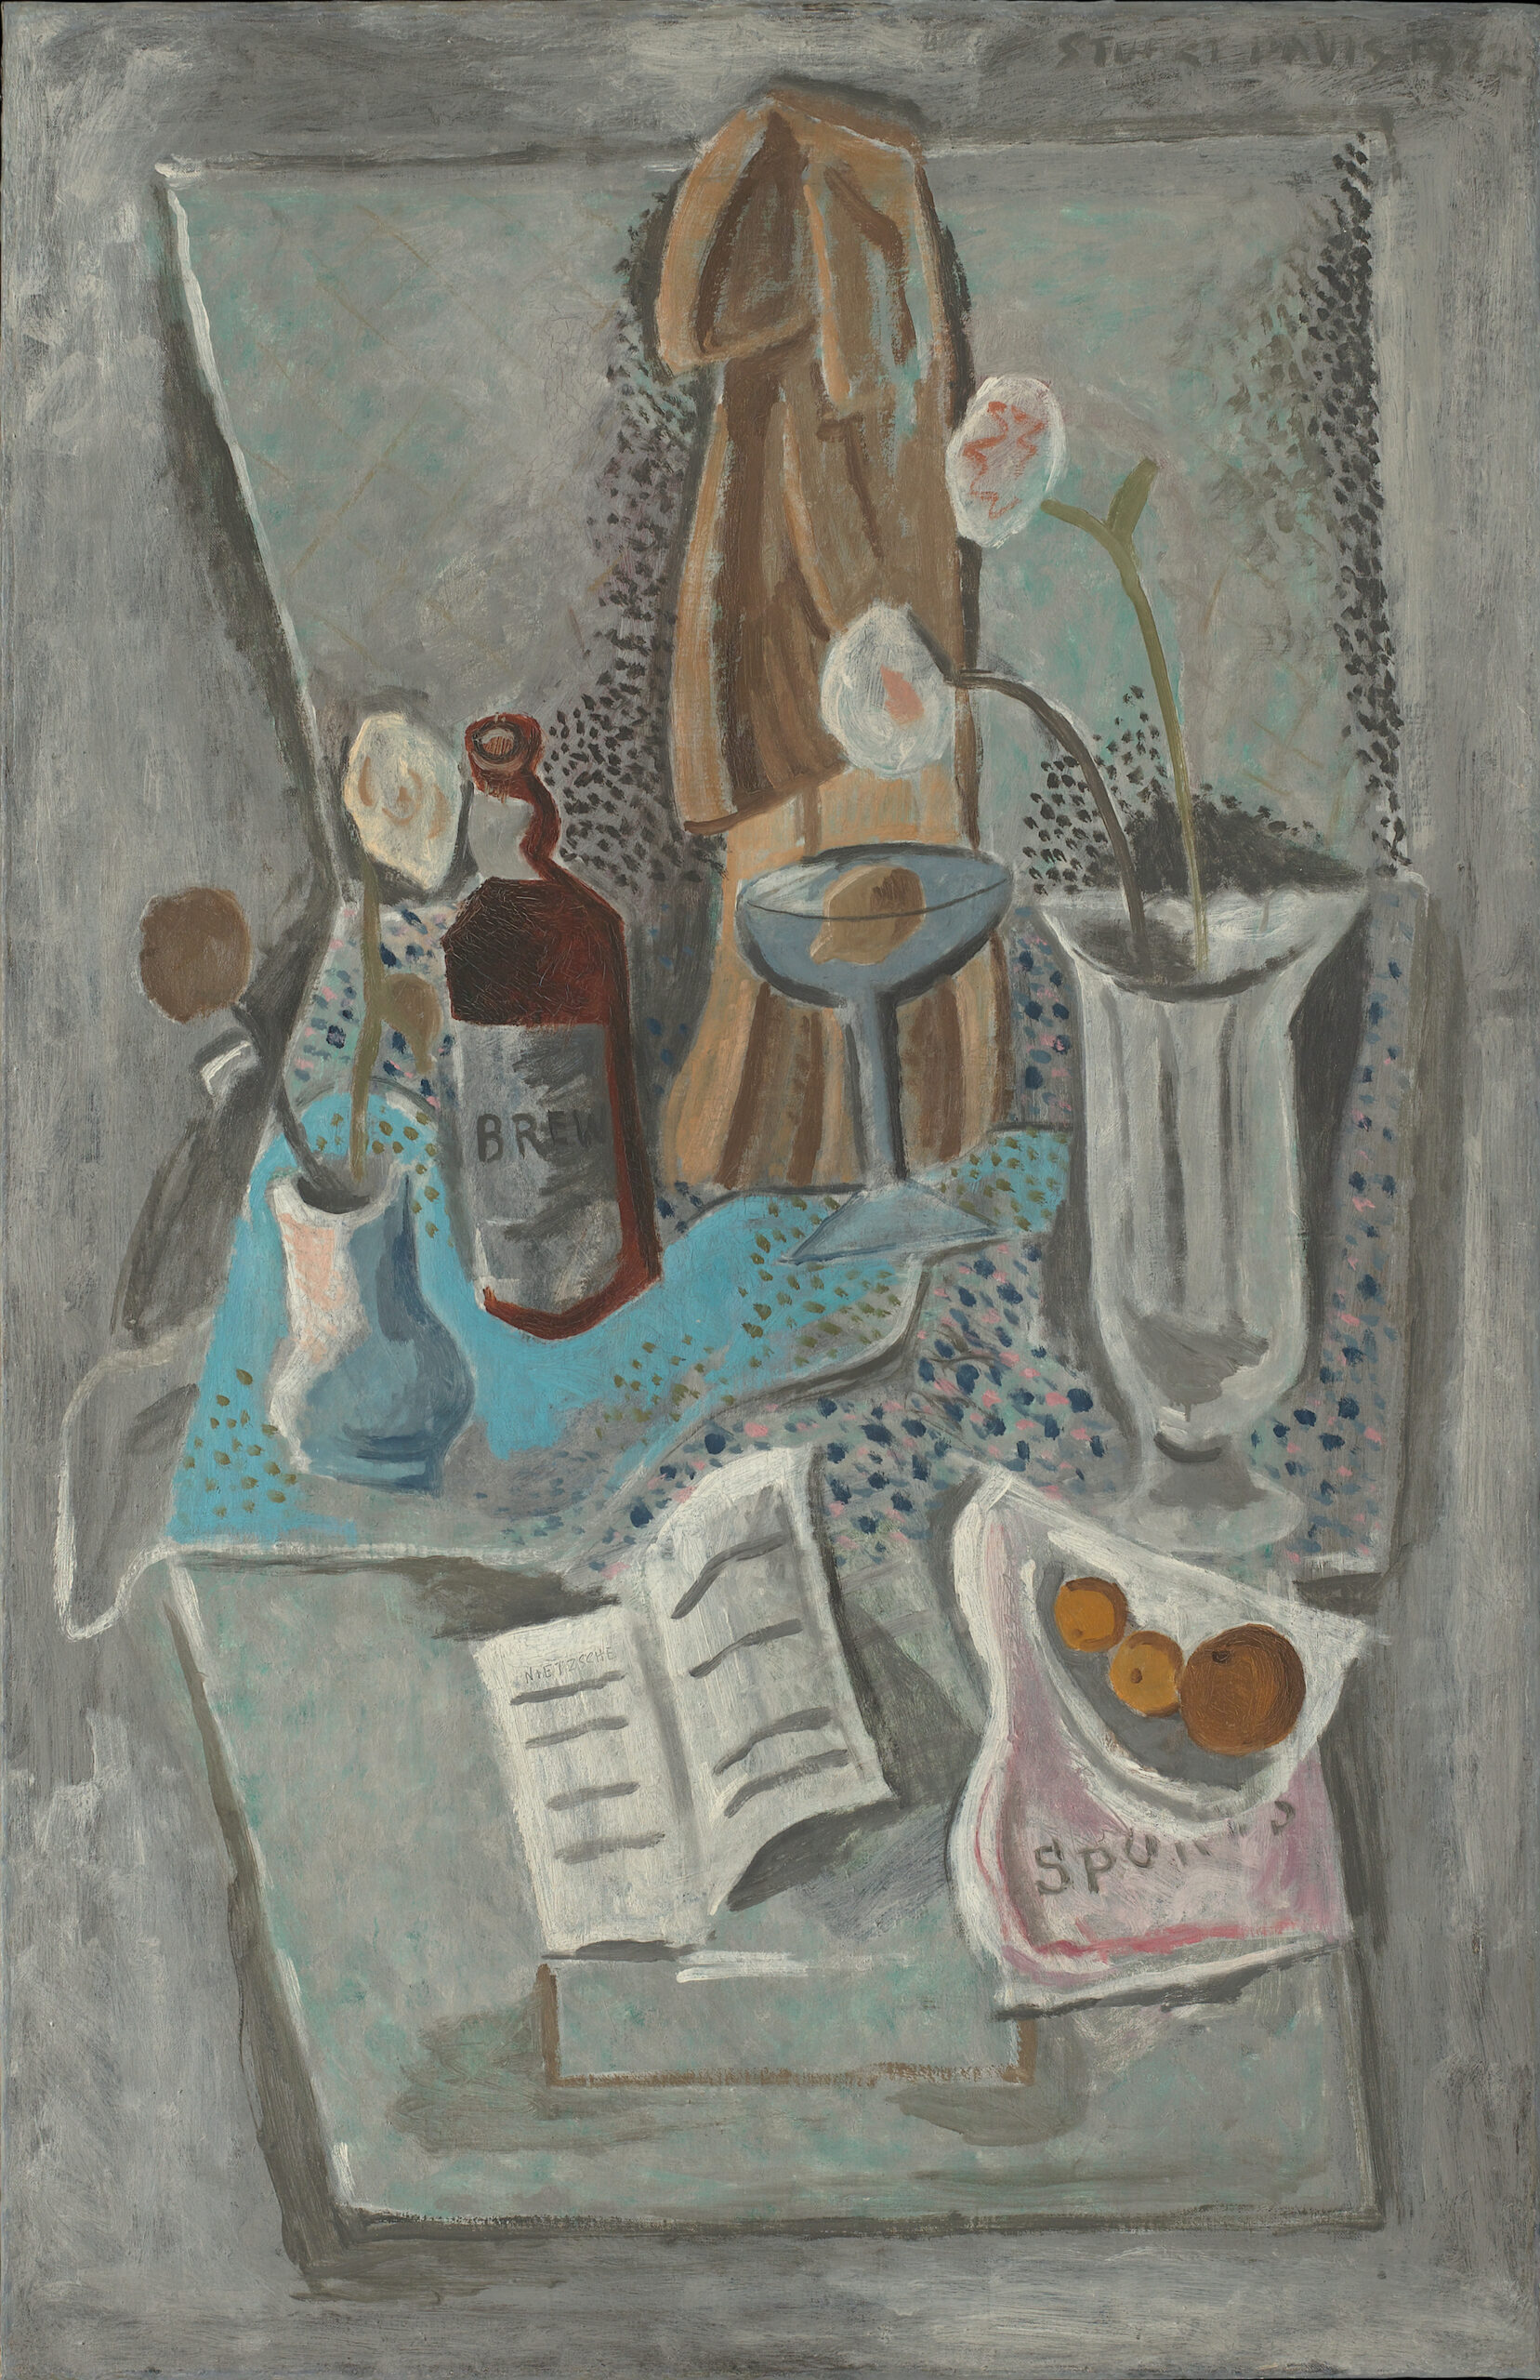 Still life painting featuring vases, flowers, fruits and books on a table in a predominately blue palette.